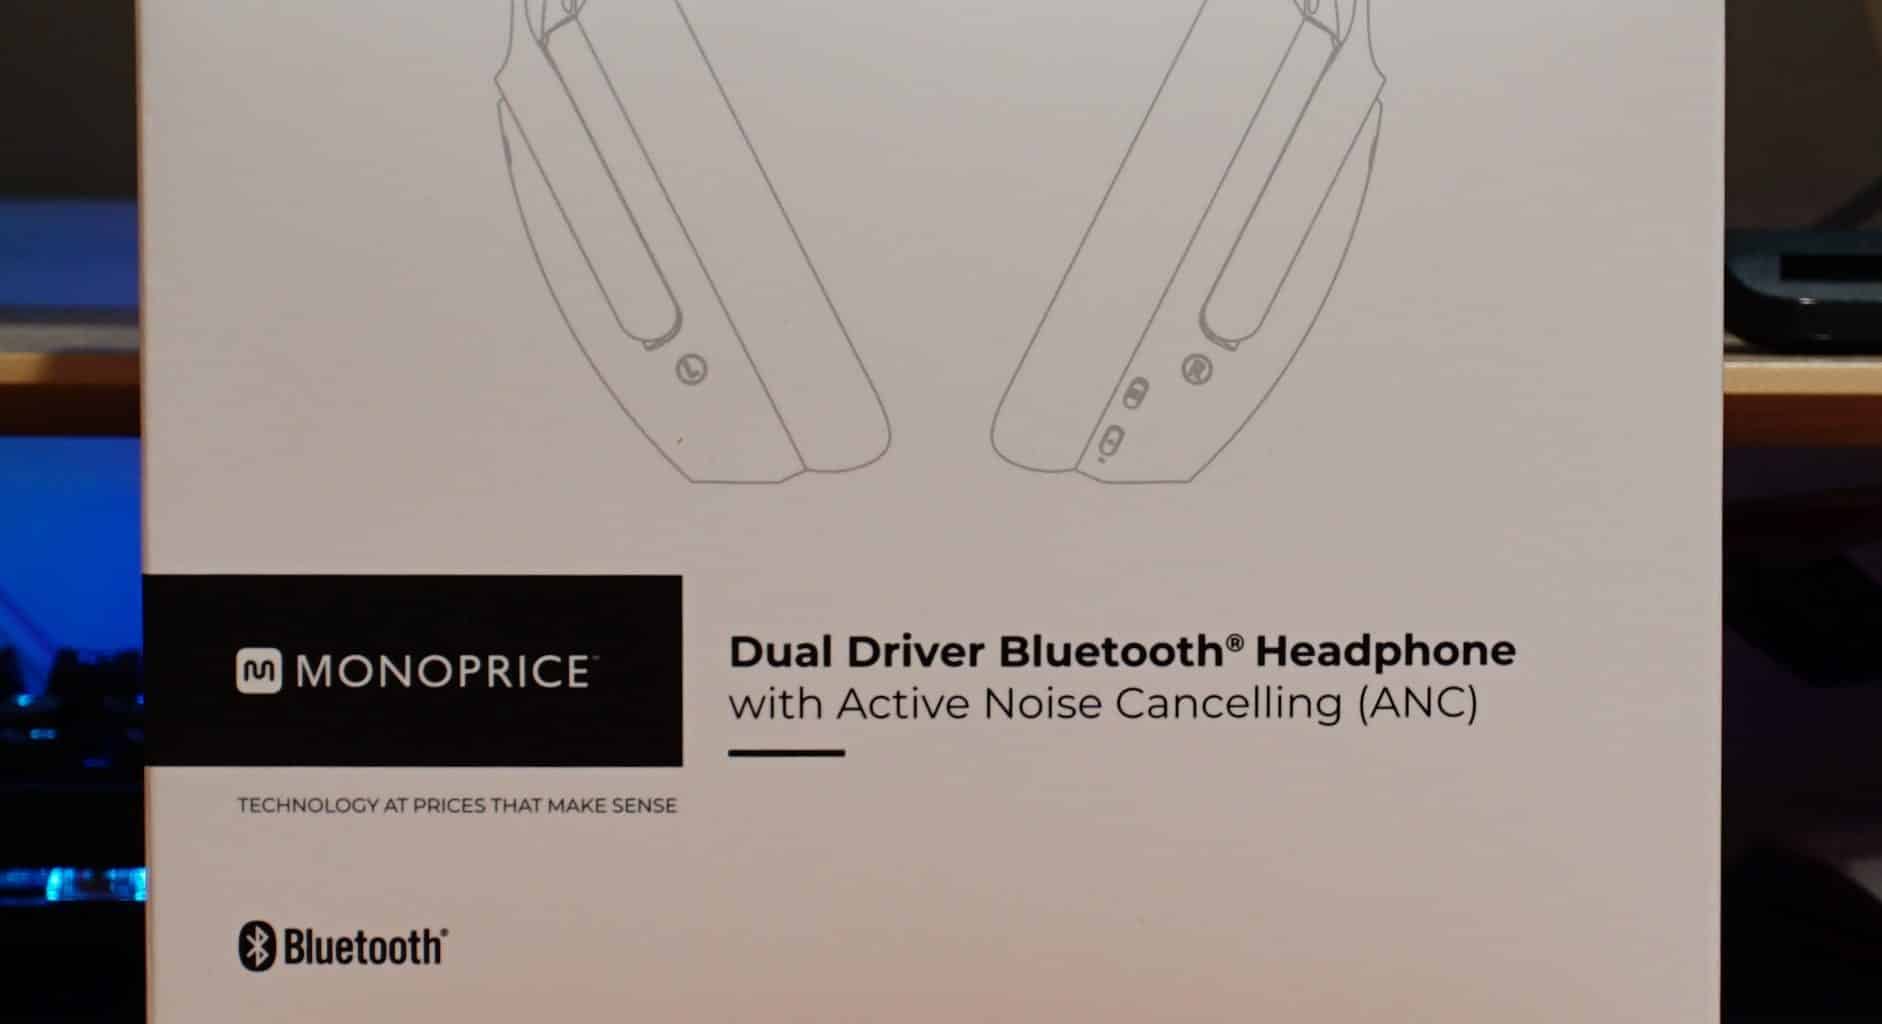 Monoprice Dual Driver Bluetooth Headphone with ANC Review - A Lot of Features at an Affordable Price 43534